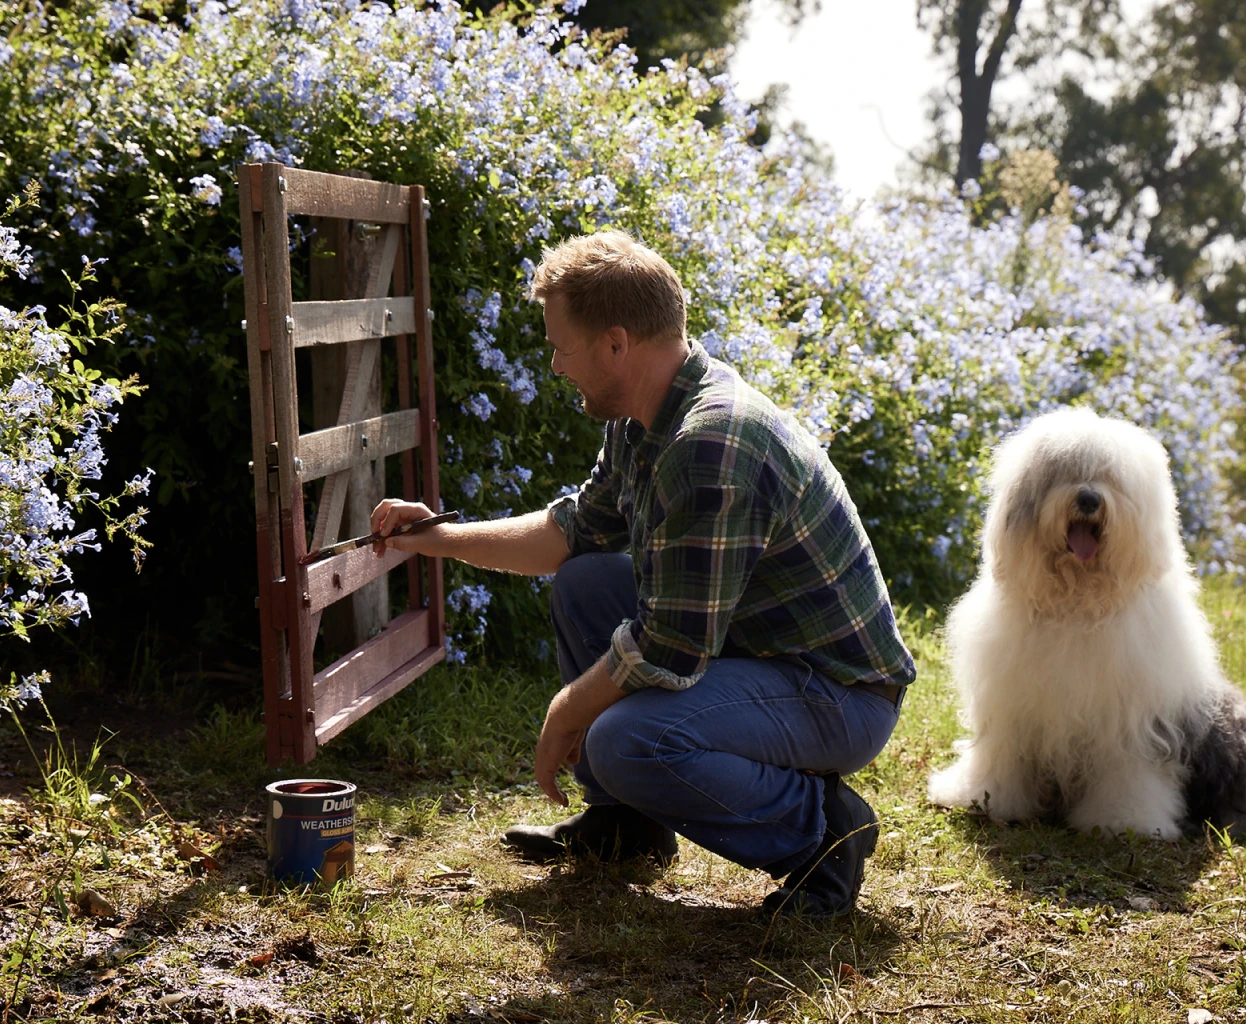 Father painting wooden gate with Dulux Weathershield with the Dulux dog by his side.